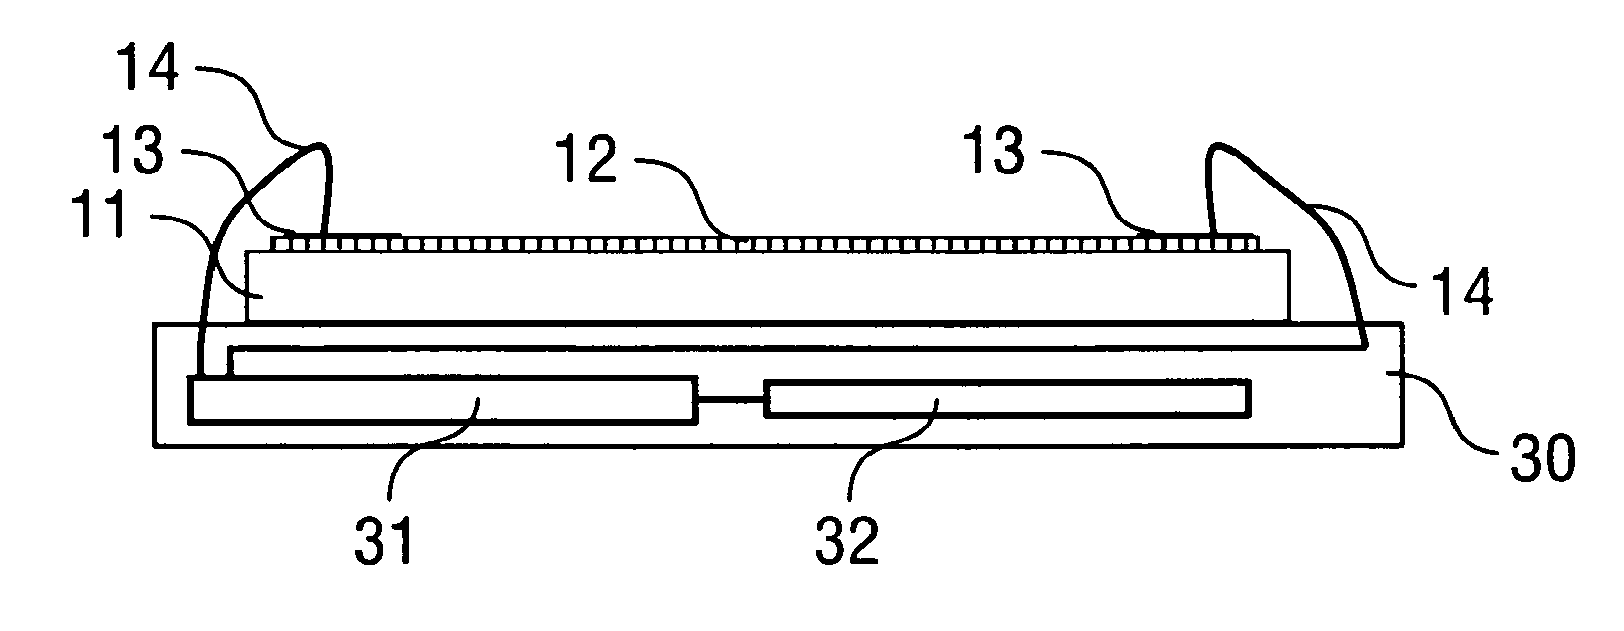 Radiation detector and measurement device for detecting X-ray radiation